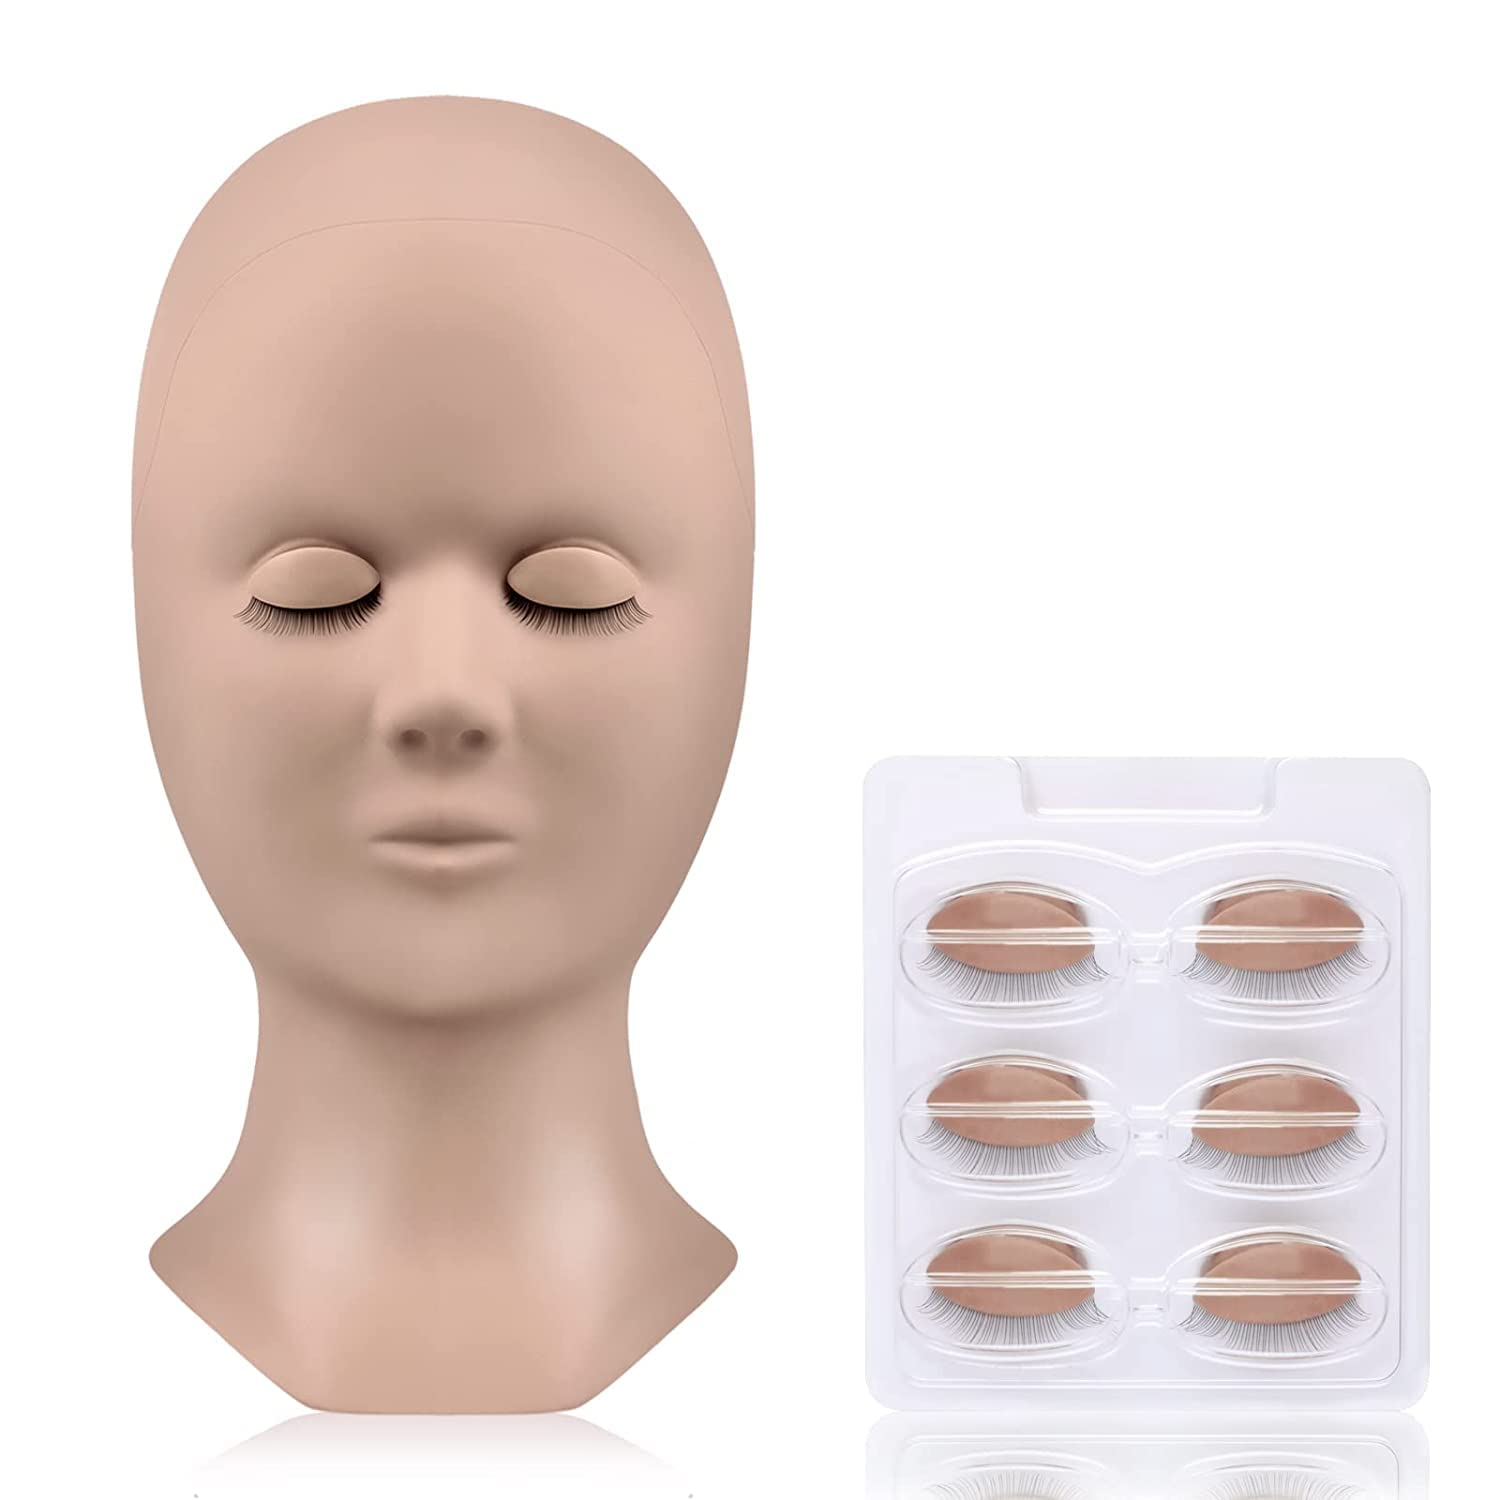 FADLASH Lash Mannequin Head with 4 Pairs Replacement Eyelids for Training  Eyelash Extensions and Makeup Mannequin Head for Practice